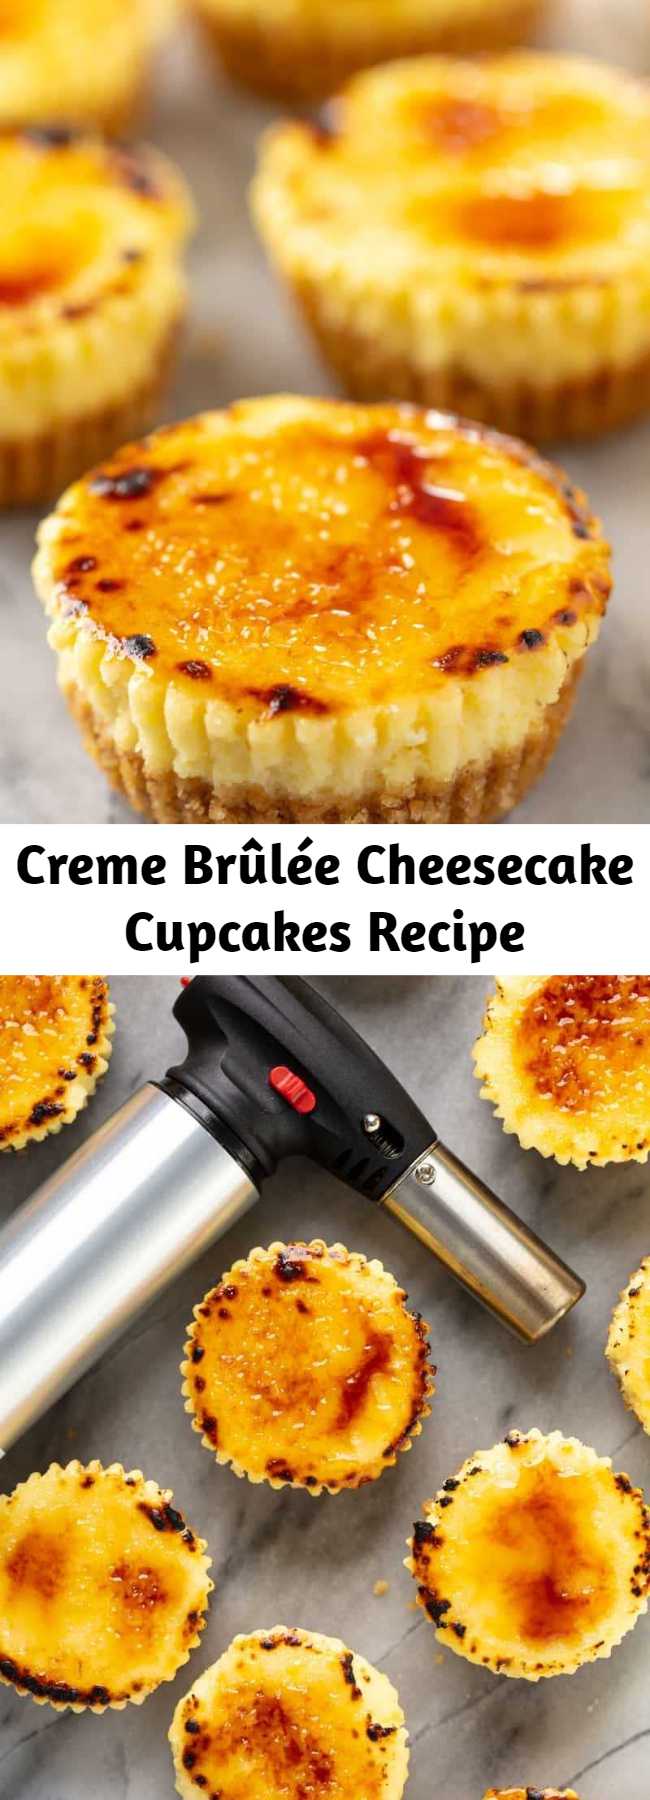 Creme Brûlée Cheesecake Cupcakes Recipe - All of the delicious flavors of creme brûlée in an easy to make mini cheesecake cupcake. You'll love these delicious little single serve desserts! #cheesecake #dessertrecipe